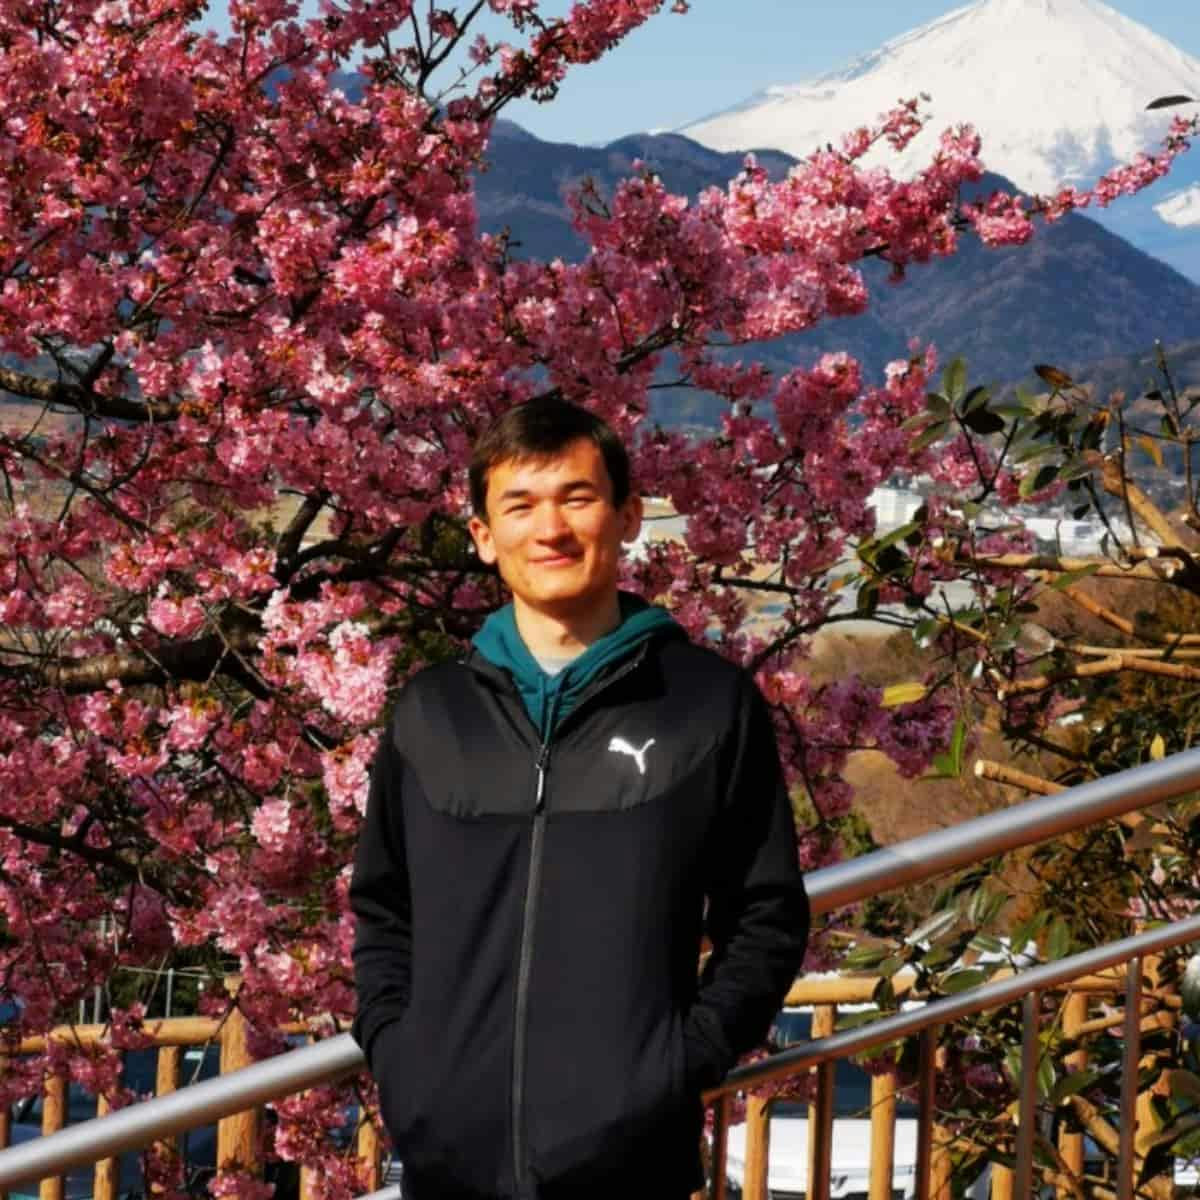 Studying Computer Engineering in Japanese at Tokai University with a Scholarship